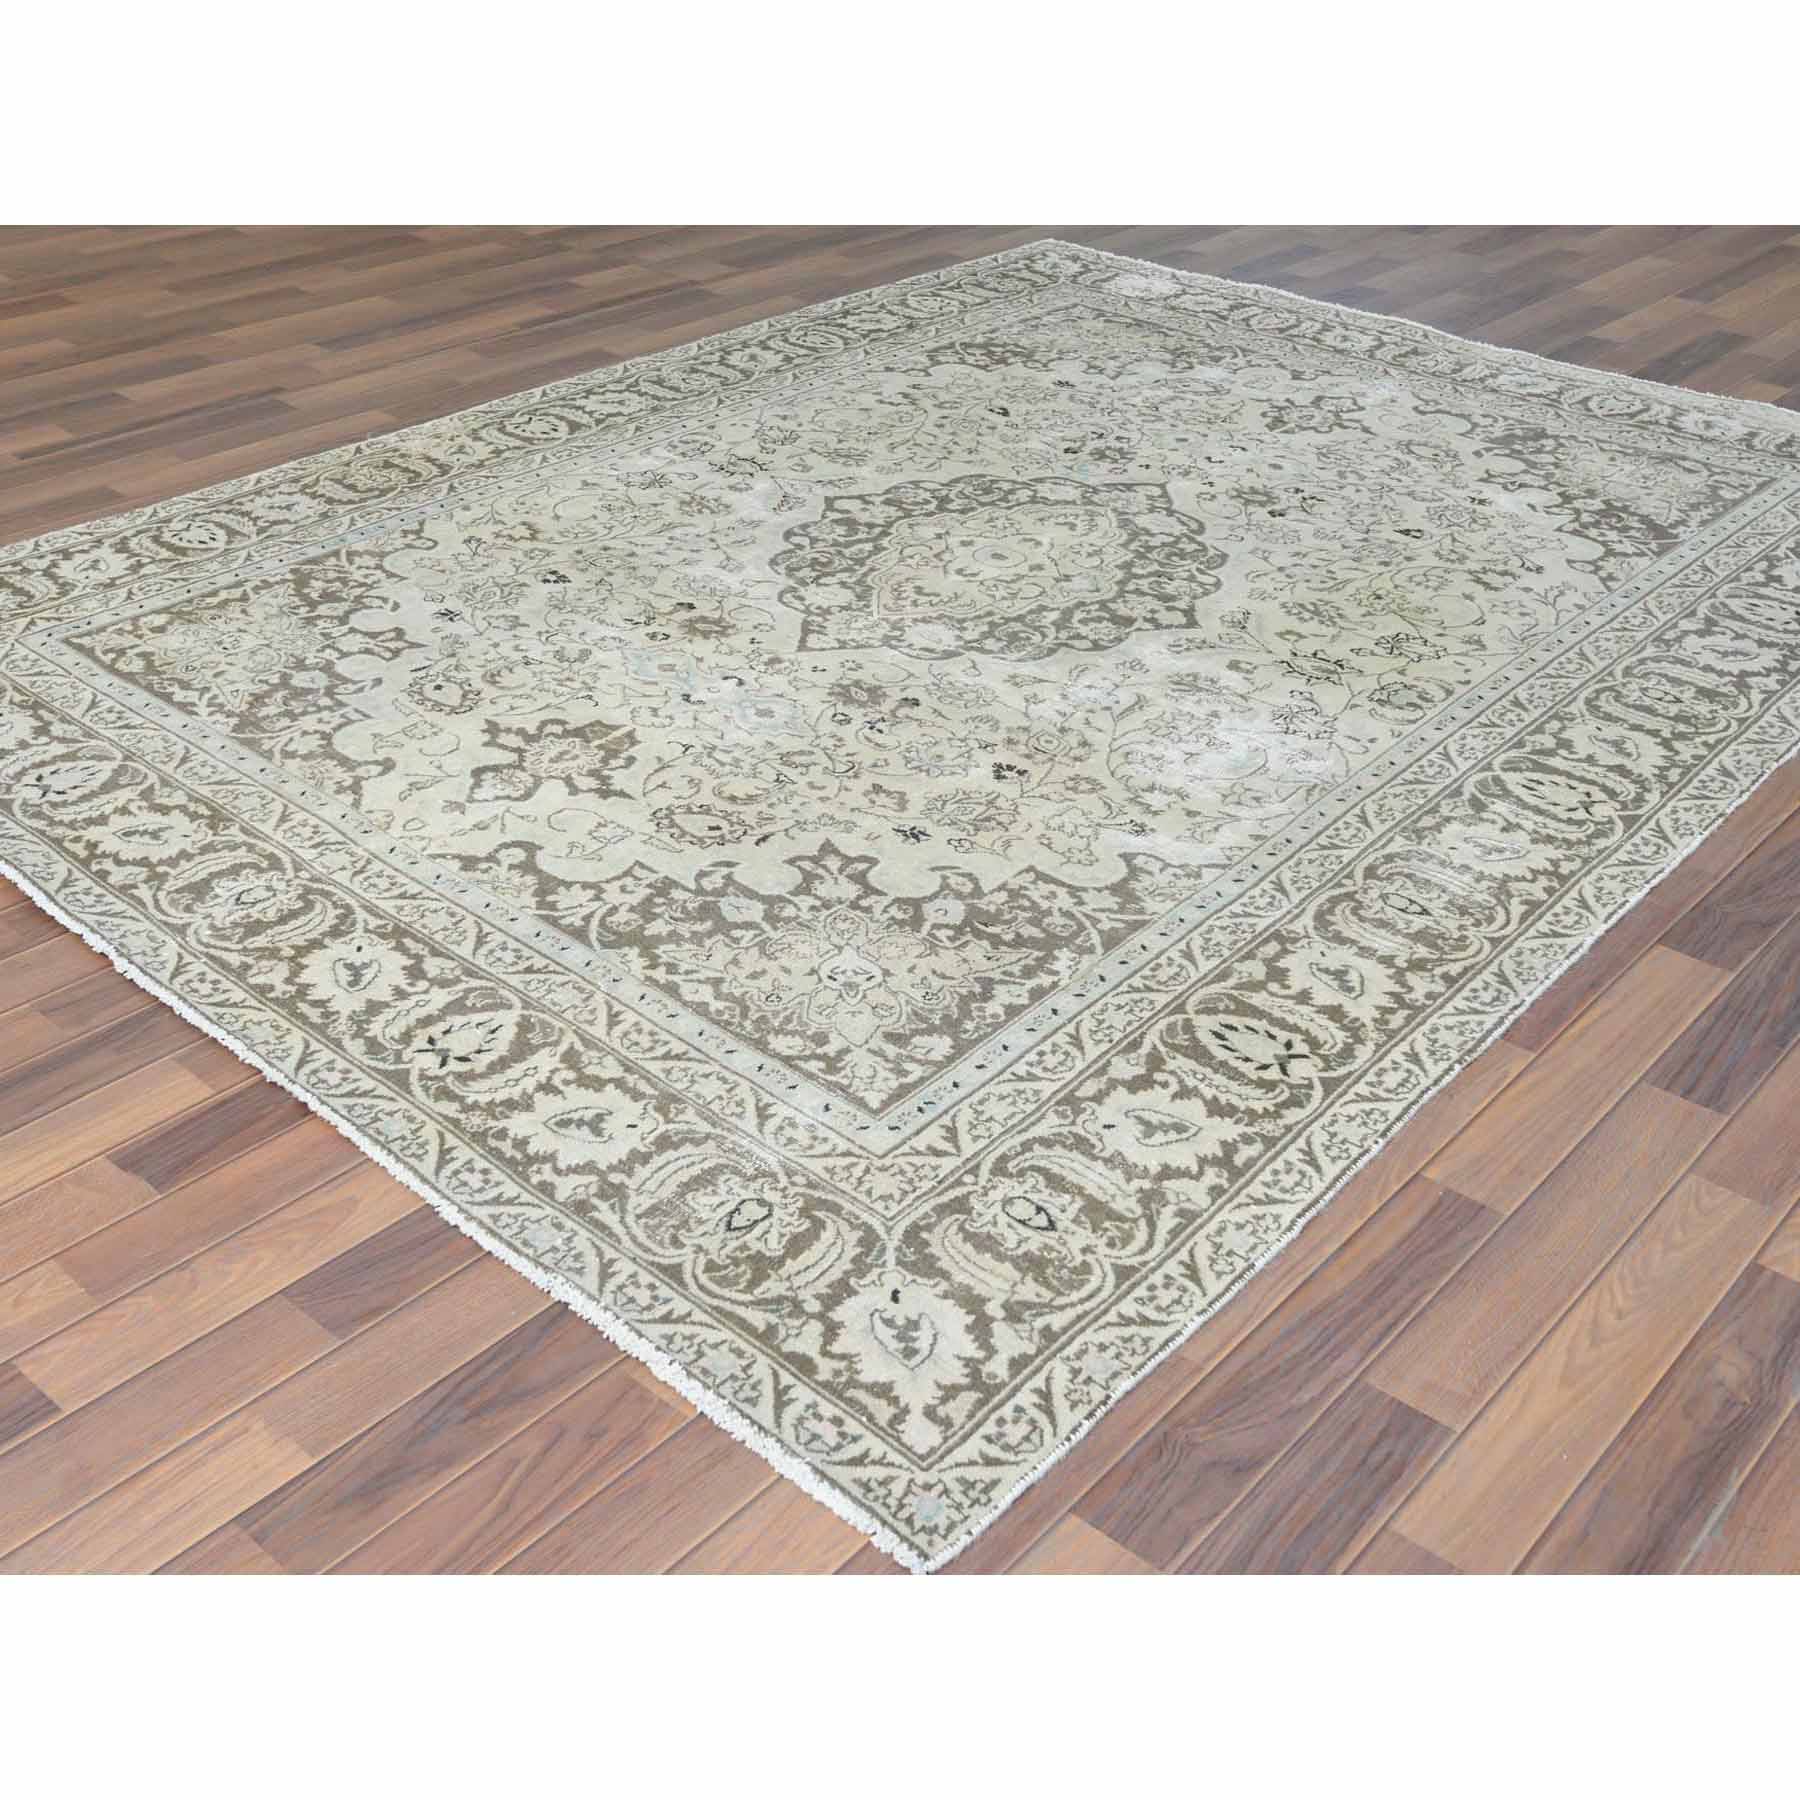 Overdyed-Vintage-Hand-Knotted-Rug-307515